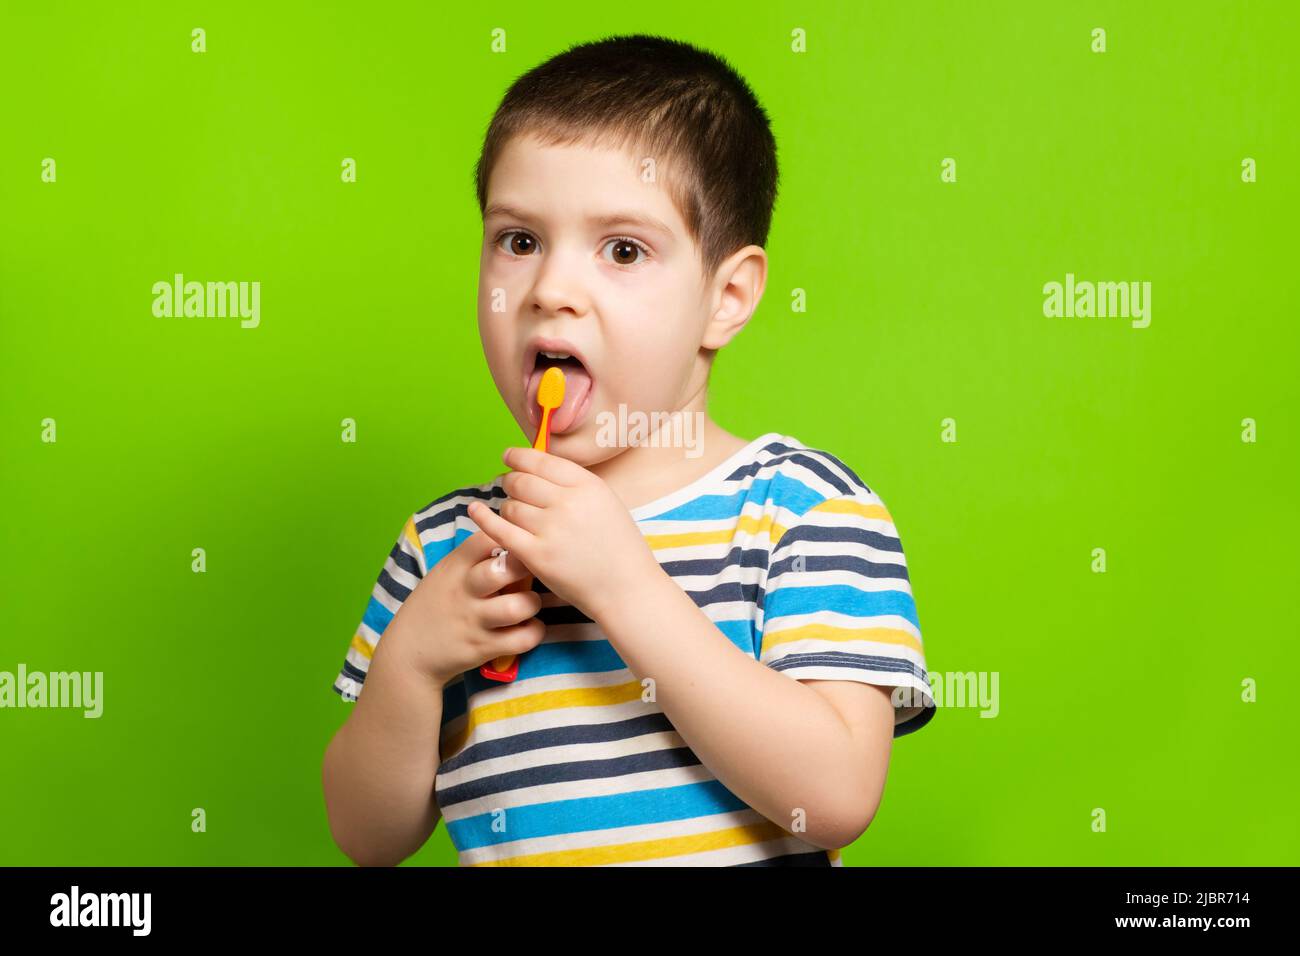 A preschool boy of 4 years cleans with a toothbrush a tongue on a green background. Stock Photo